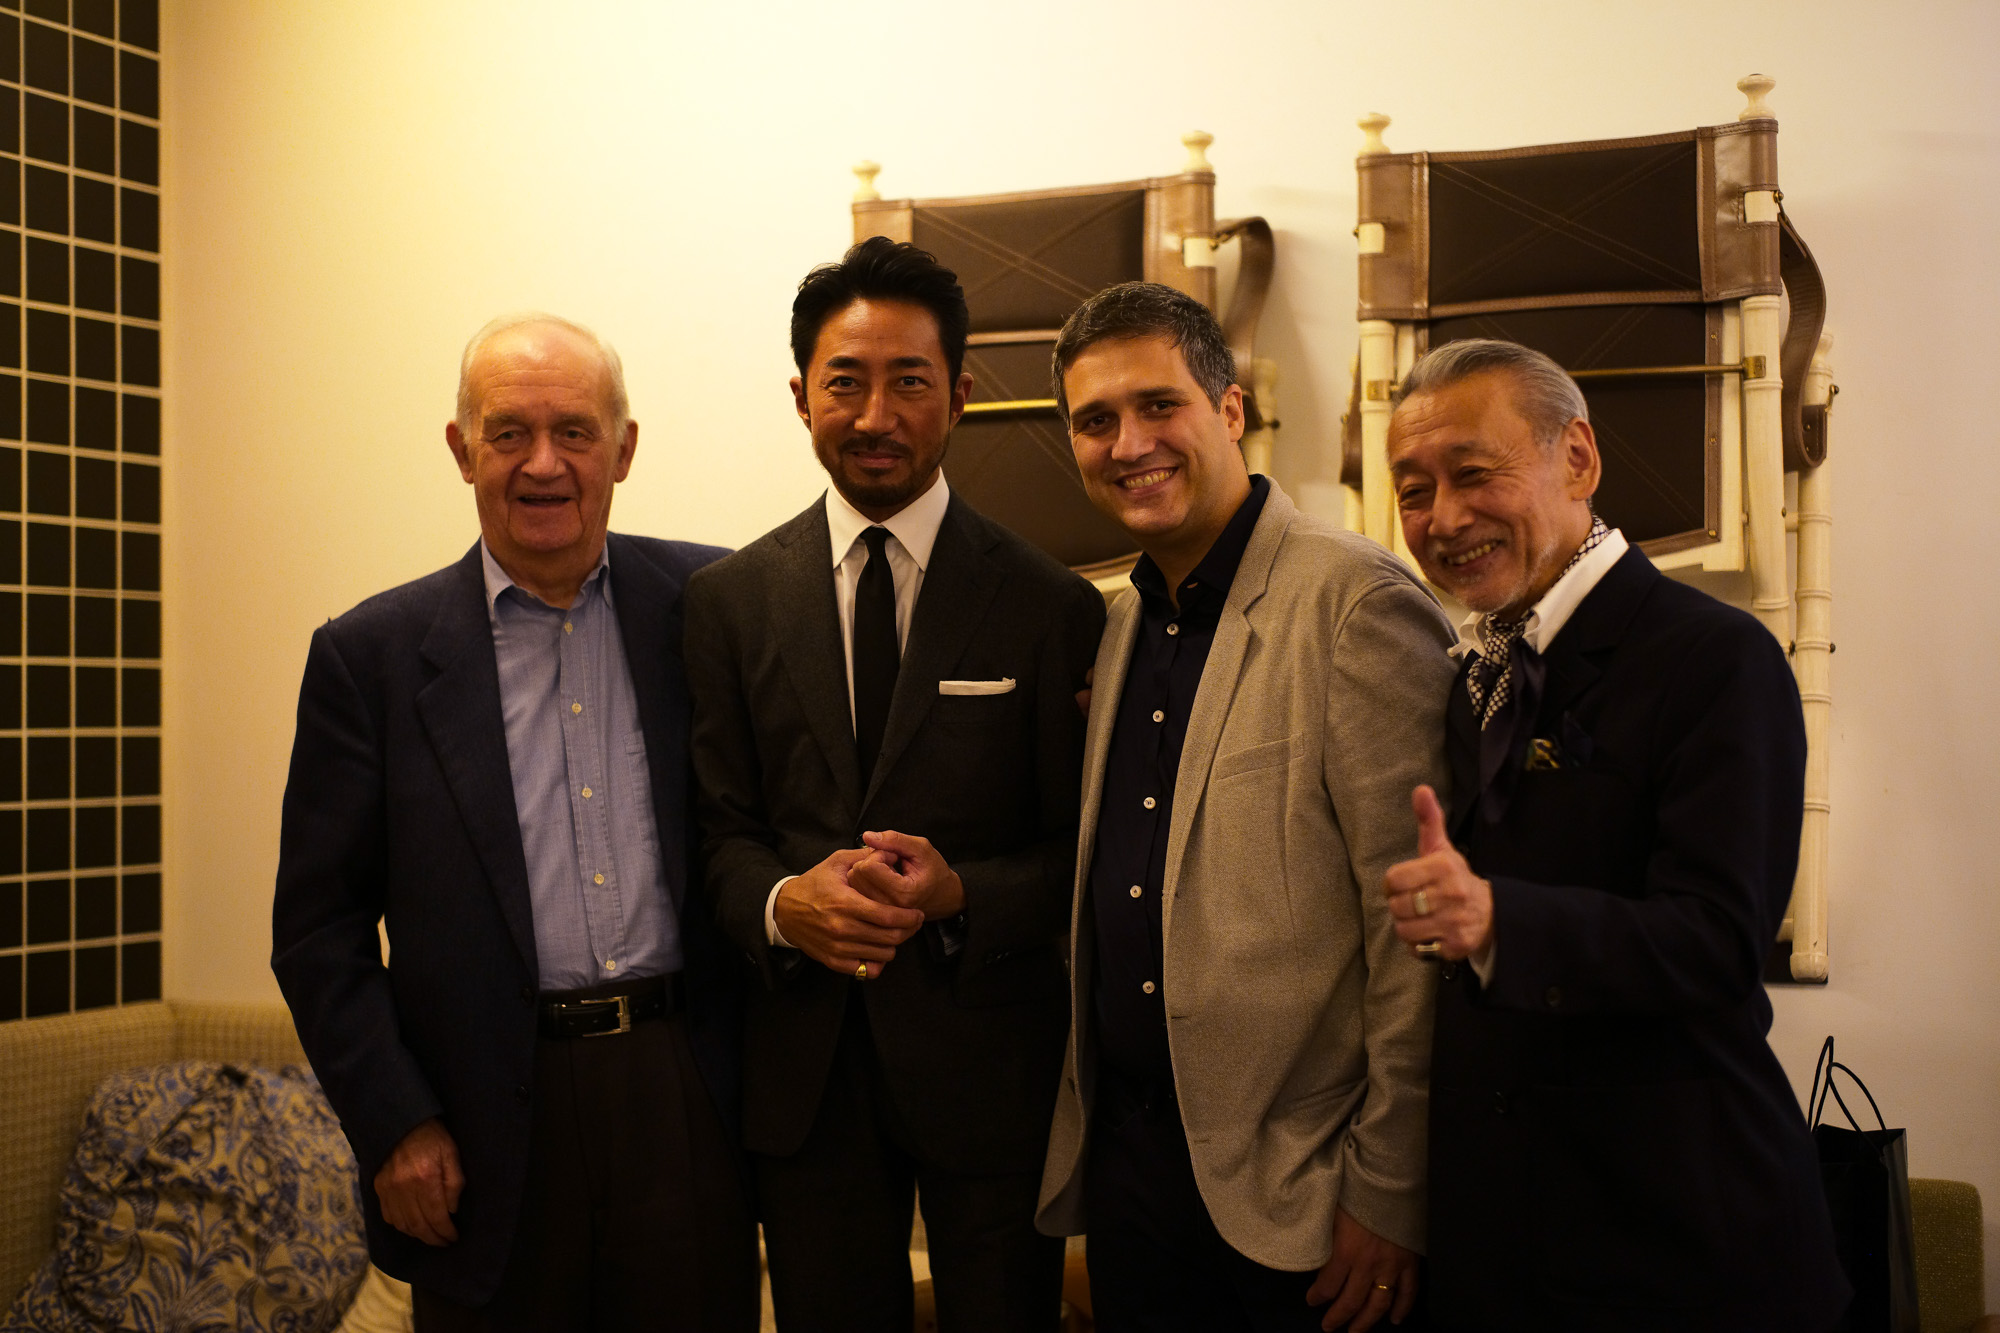 Enzo Bonafe WELCOME PARTY enzobonafe エンツォボナフェ 愛知 名古屋 alto e diritto アルトエデリット マッシモボナフェ ダブルモンク コードバン チャッカブーツ ローファー